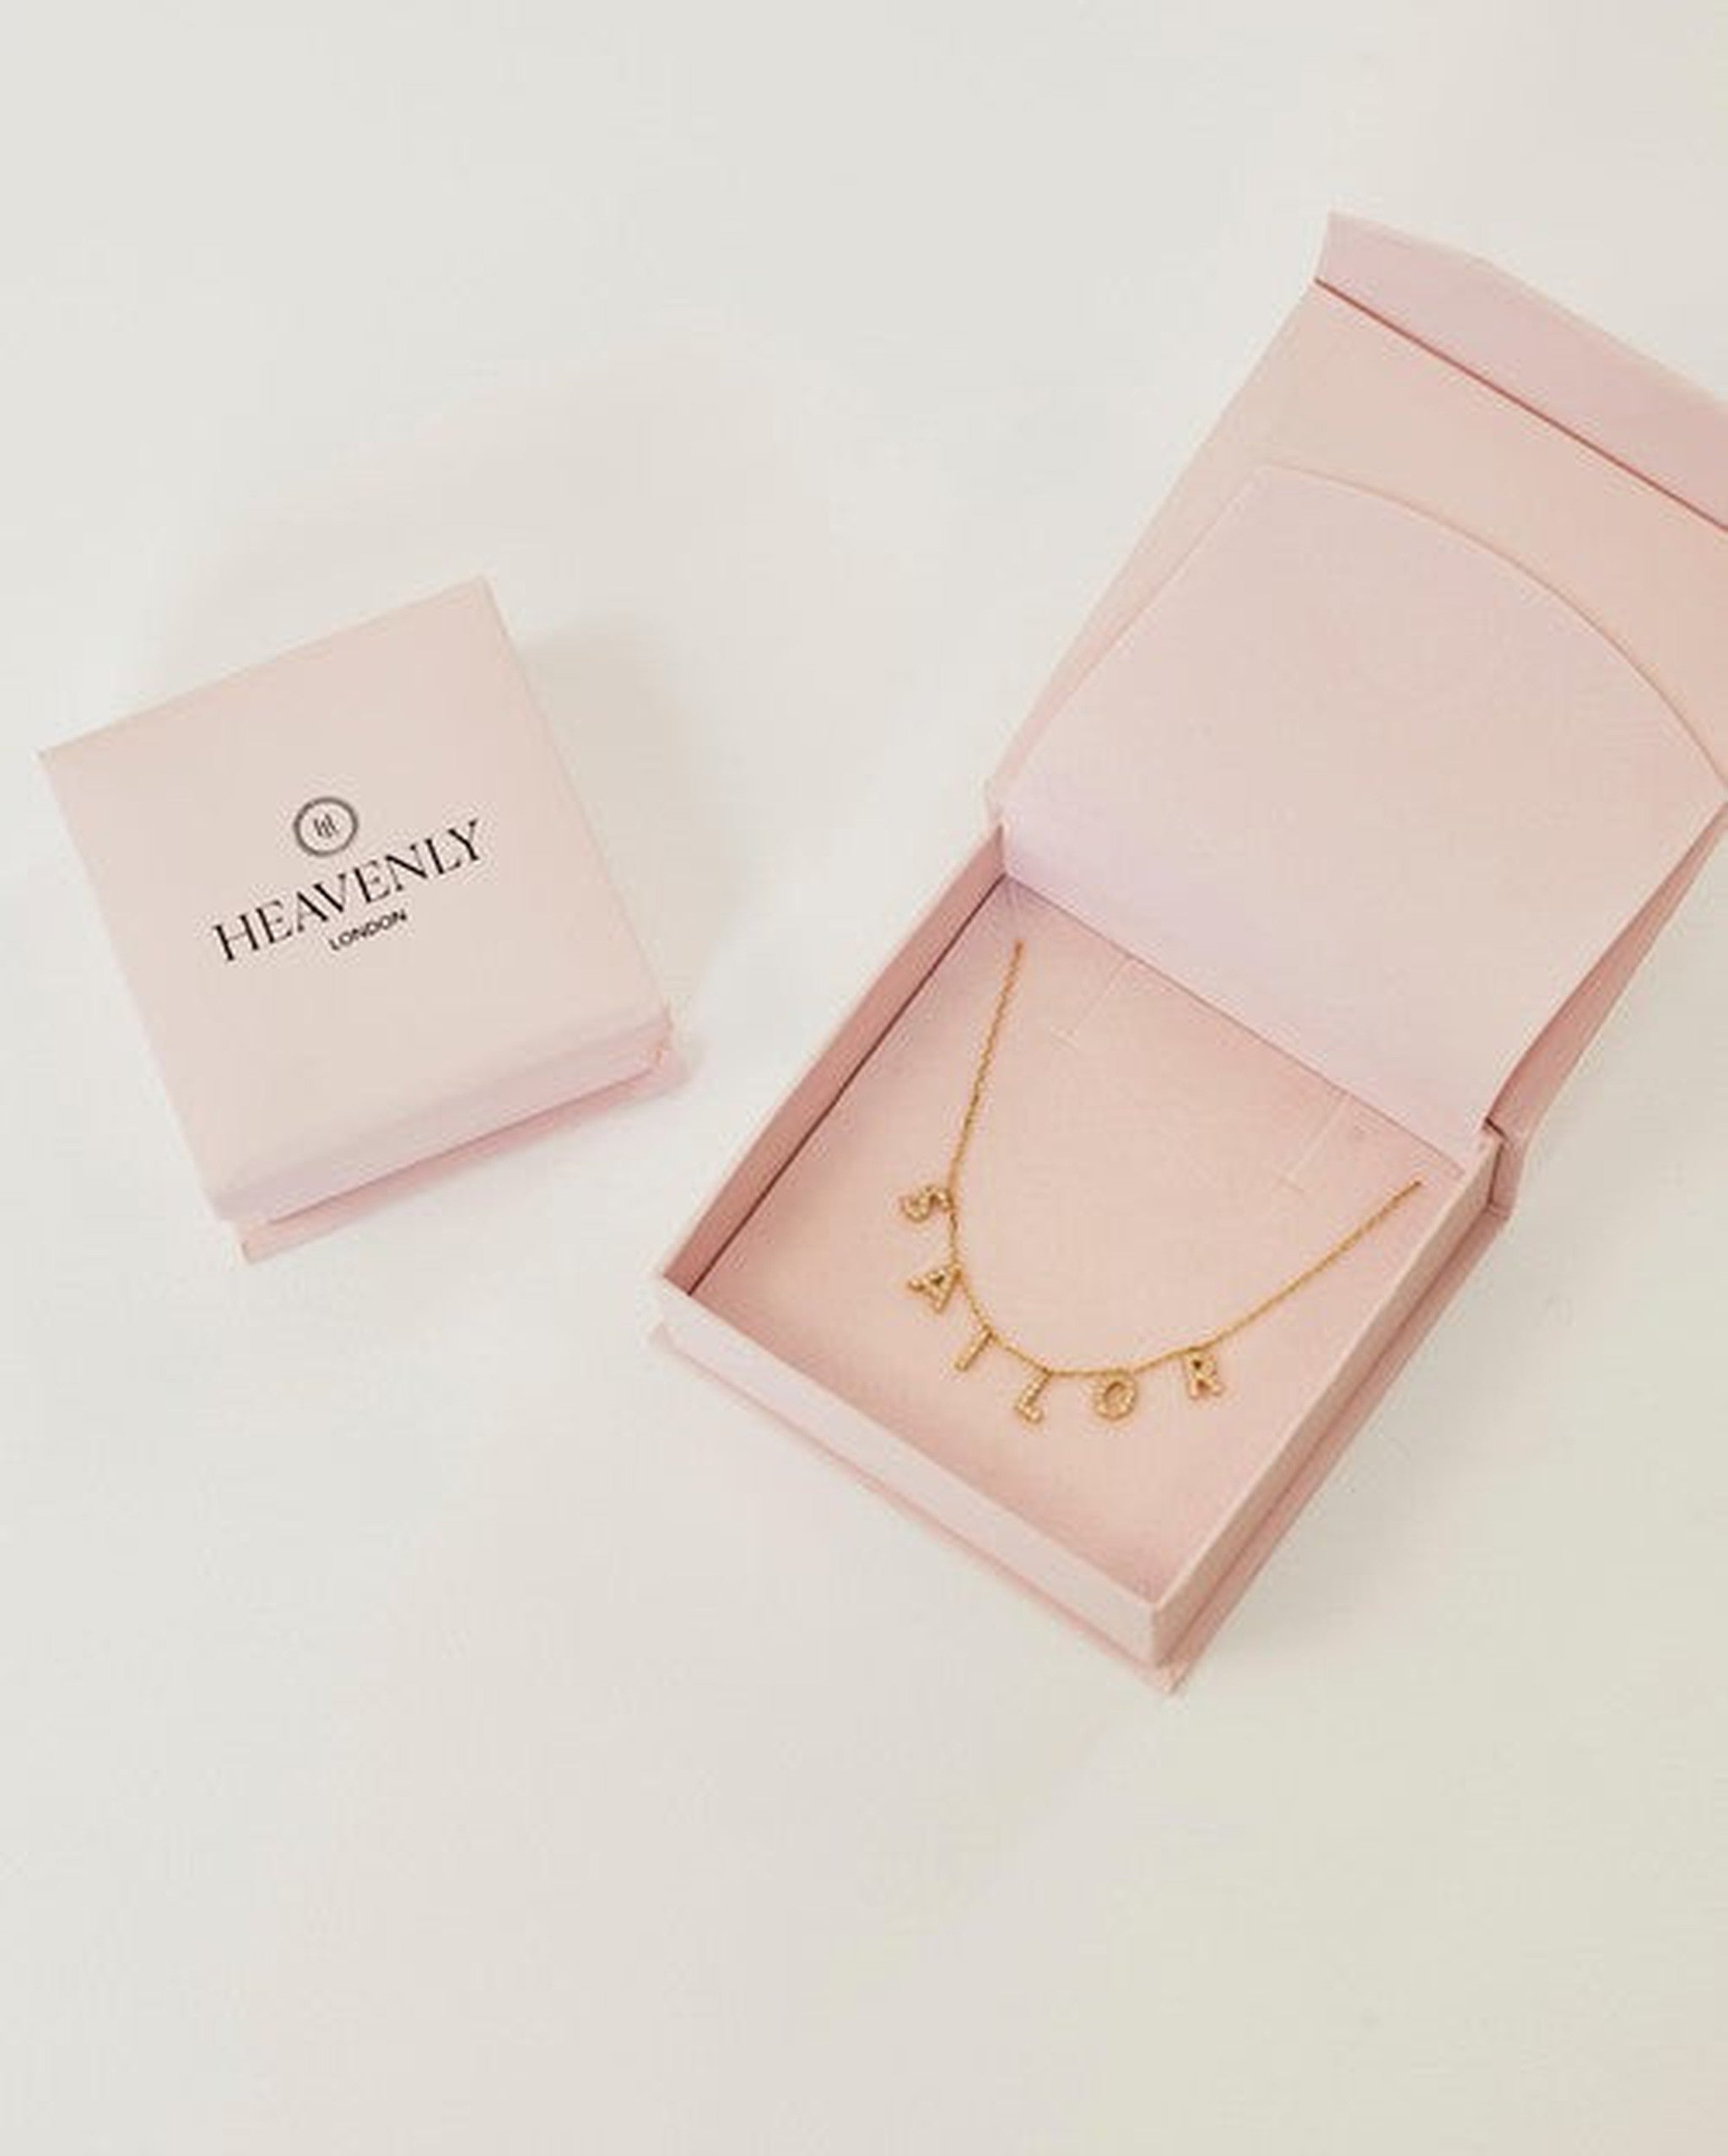 The Bespoke Gold and Diamond Name Necklace